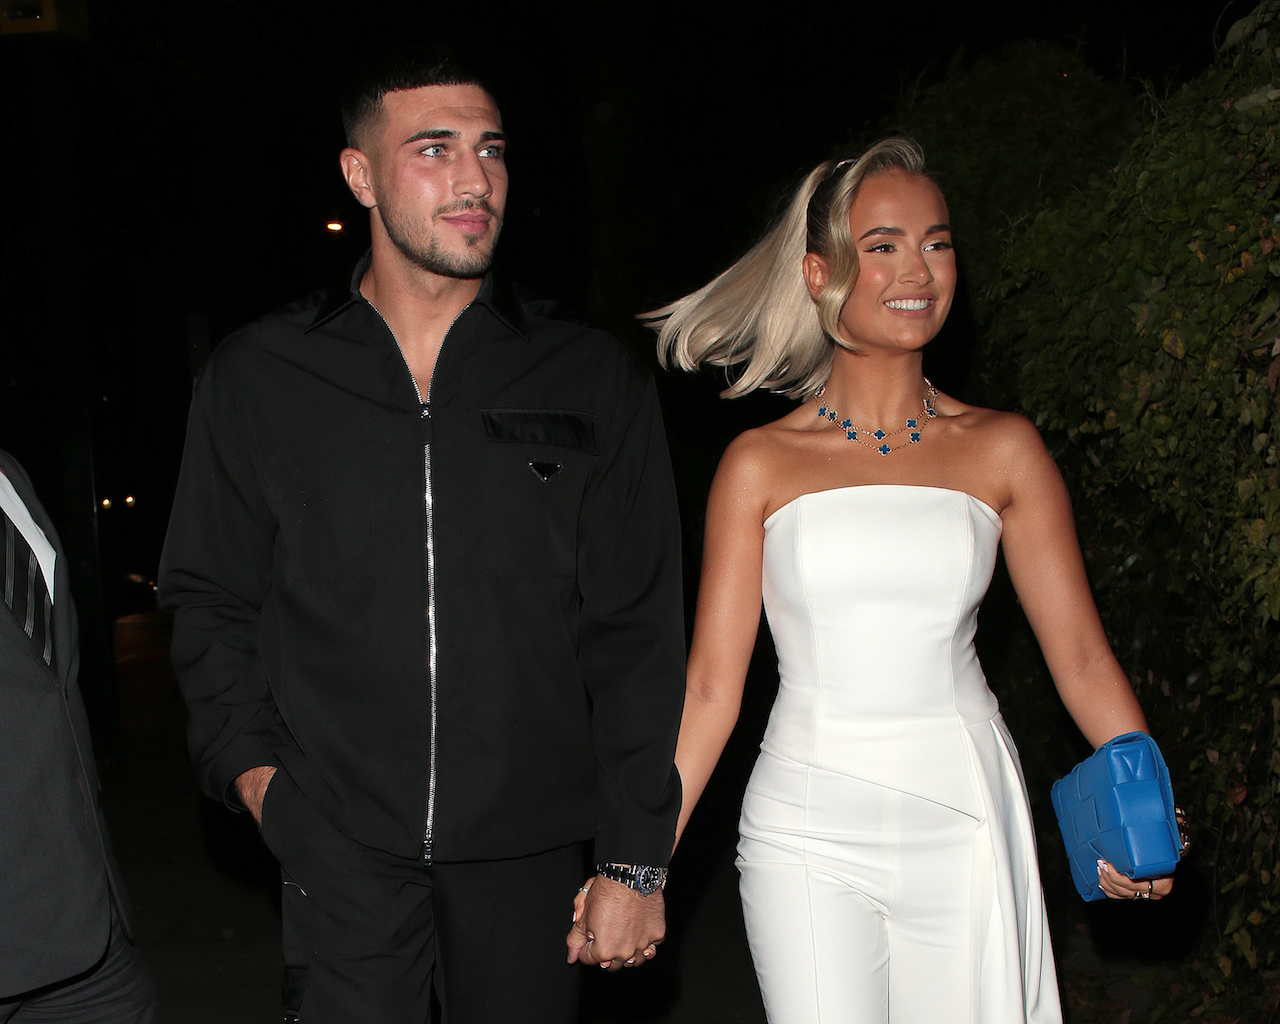 'Love Island UK' Couple Tommy Fury and Molly-Mae Hague attend Beauty Works x Molly-Mae - Christmas product launch. 